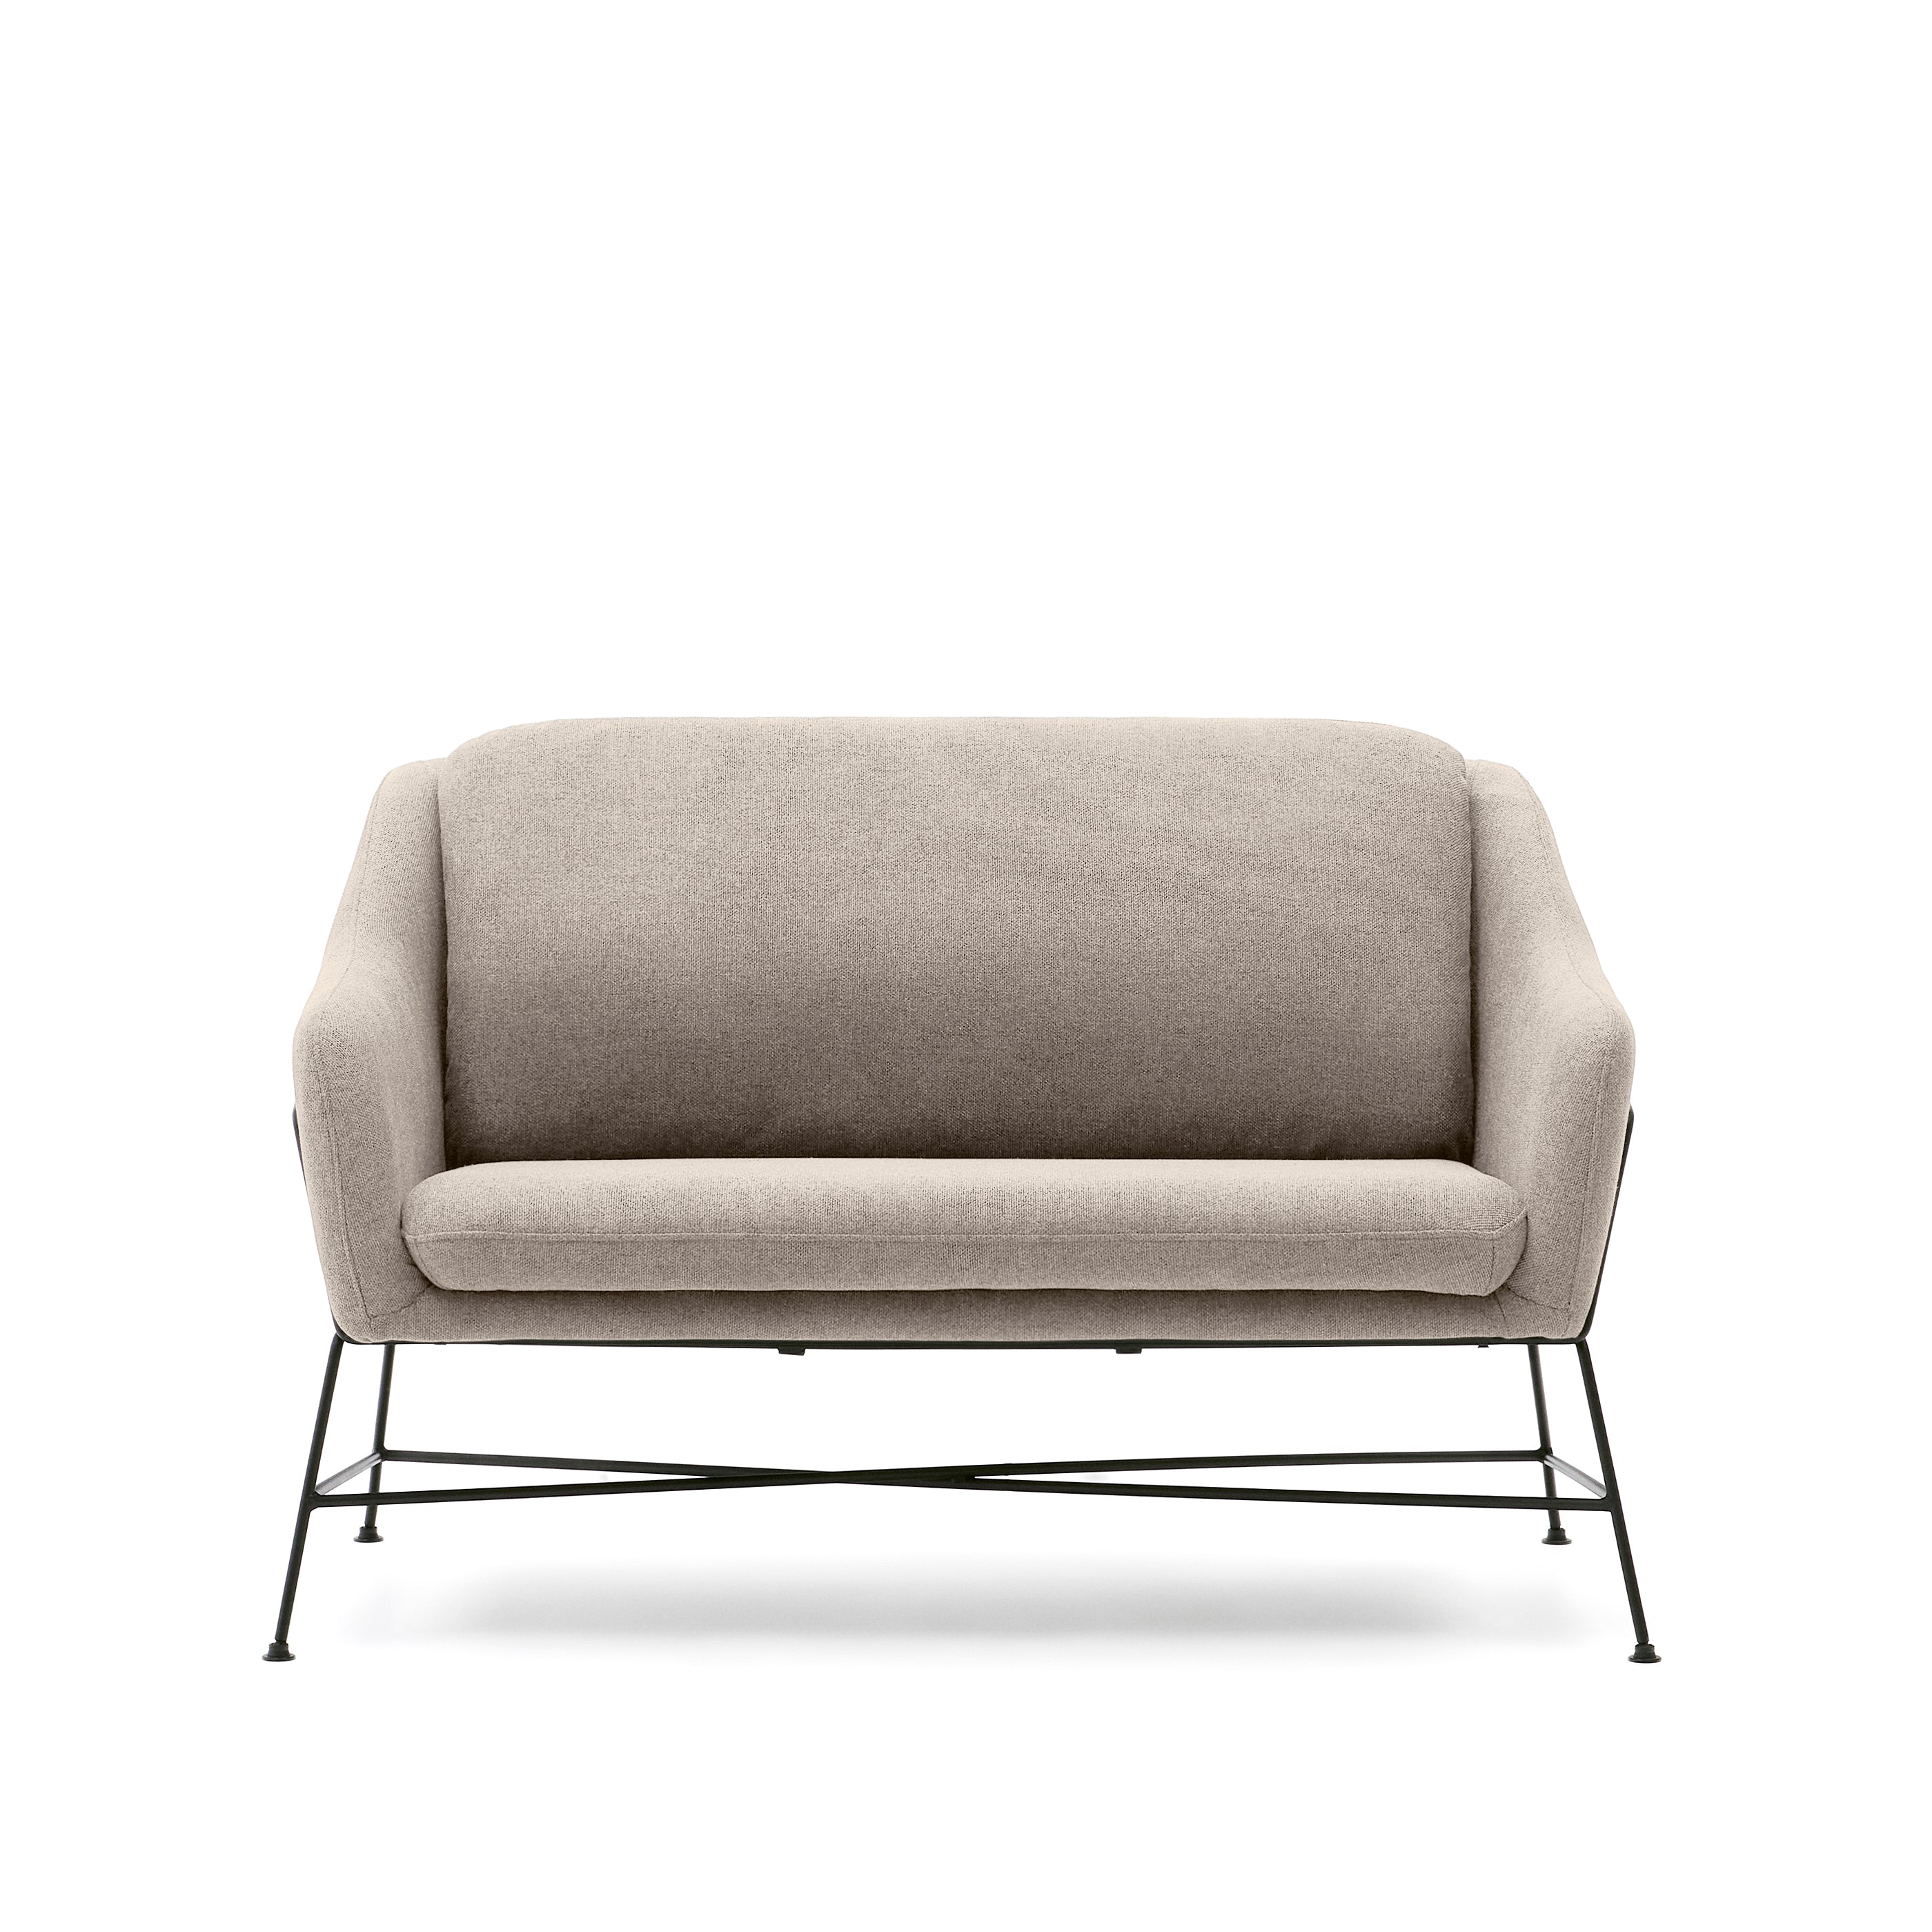 Brida 2-seater sofa in beige and steel legs with black finish, 128 cm